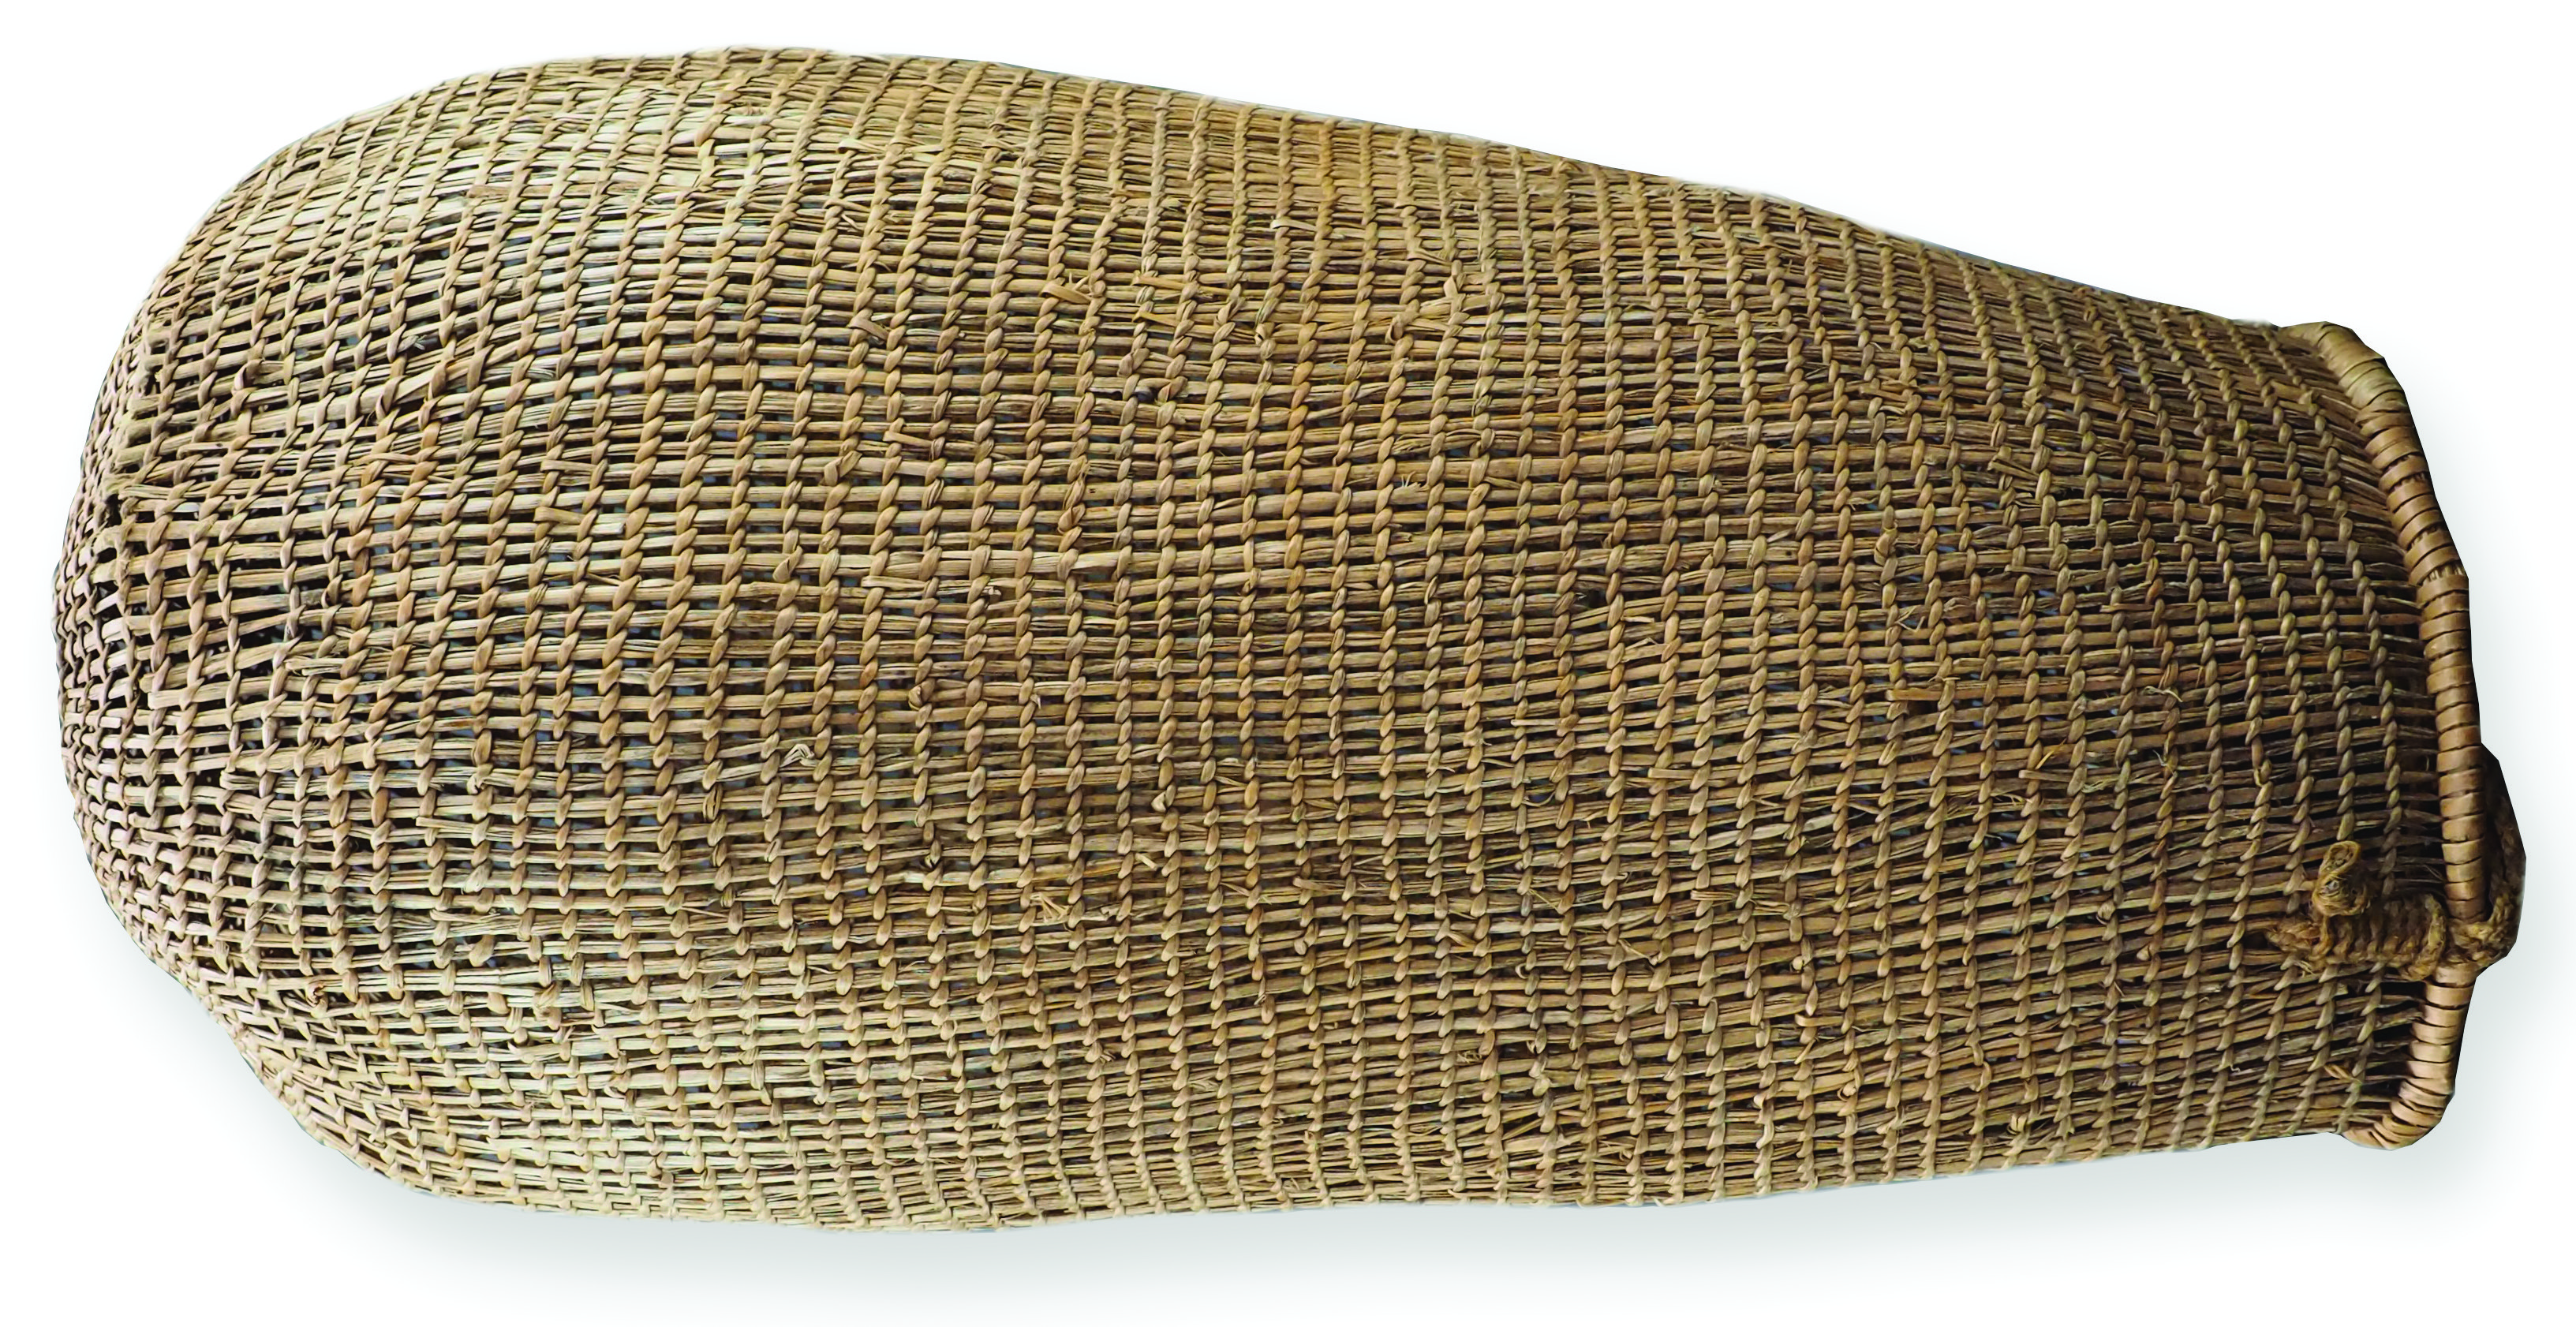 1874, basket. Collection of Queen Victoria Museum and Art Gallery, Launceston (QVM1993:H:151), donated by Miss Sarah EE Mitchell, 1909.